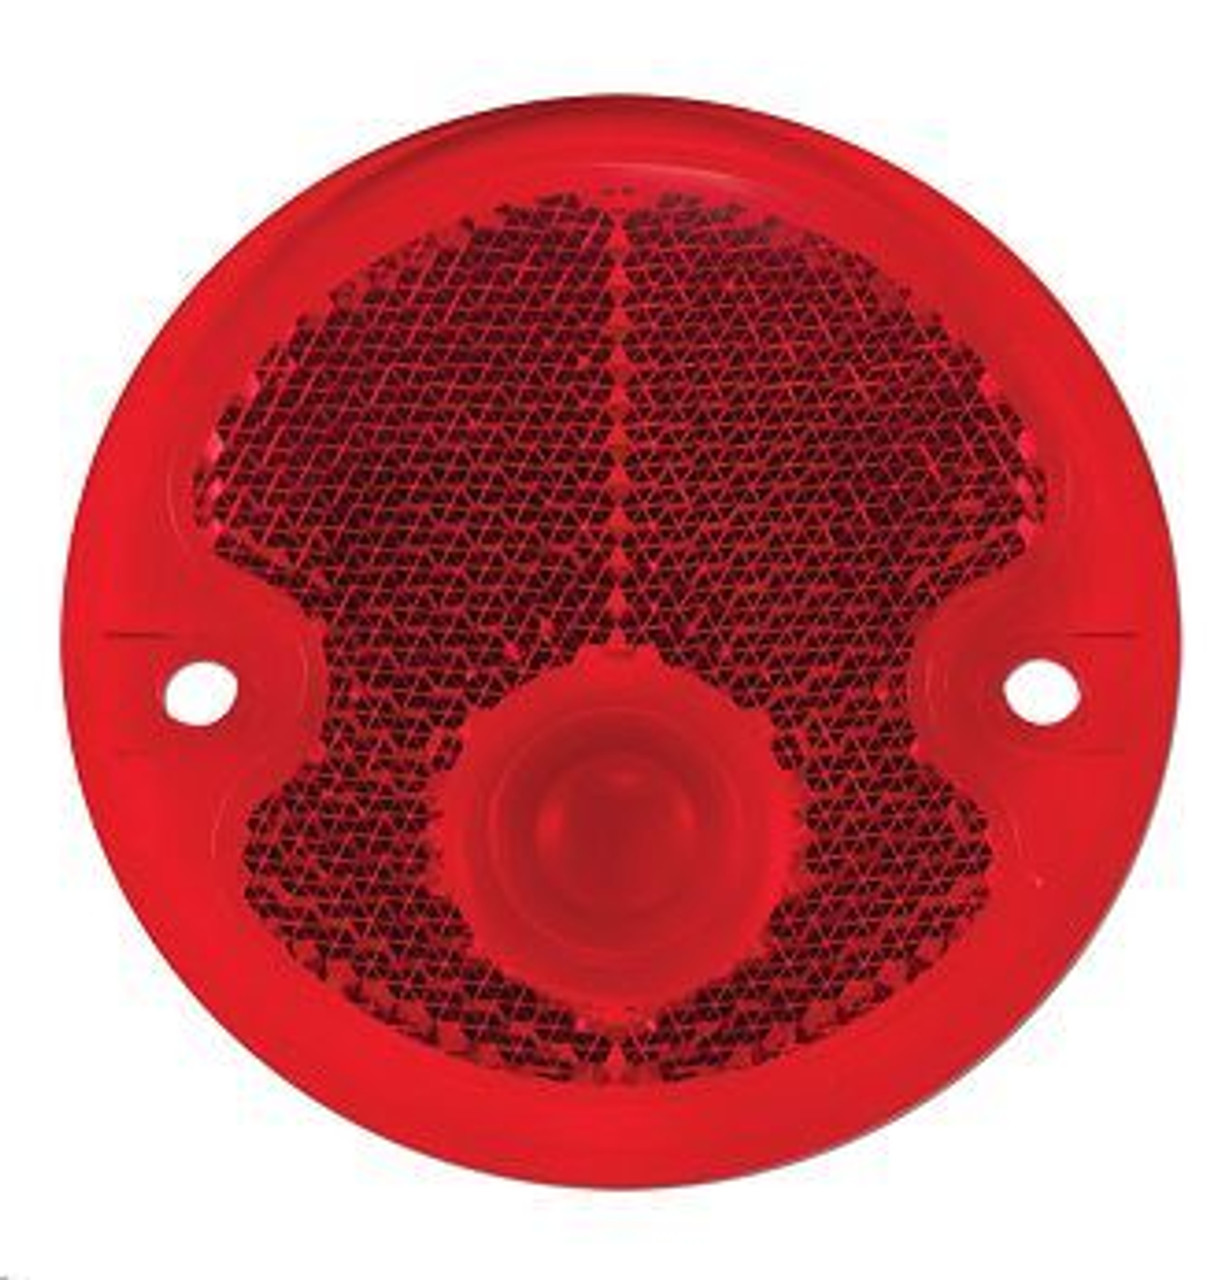 1954-55 1st Ser. Chevy/GMC Tail Lamp Lens, Red Plastic, fits RH or LH, ea.